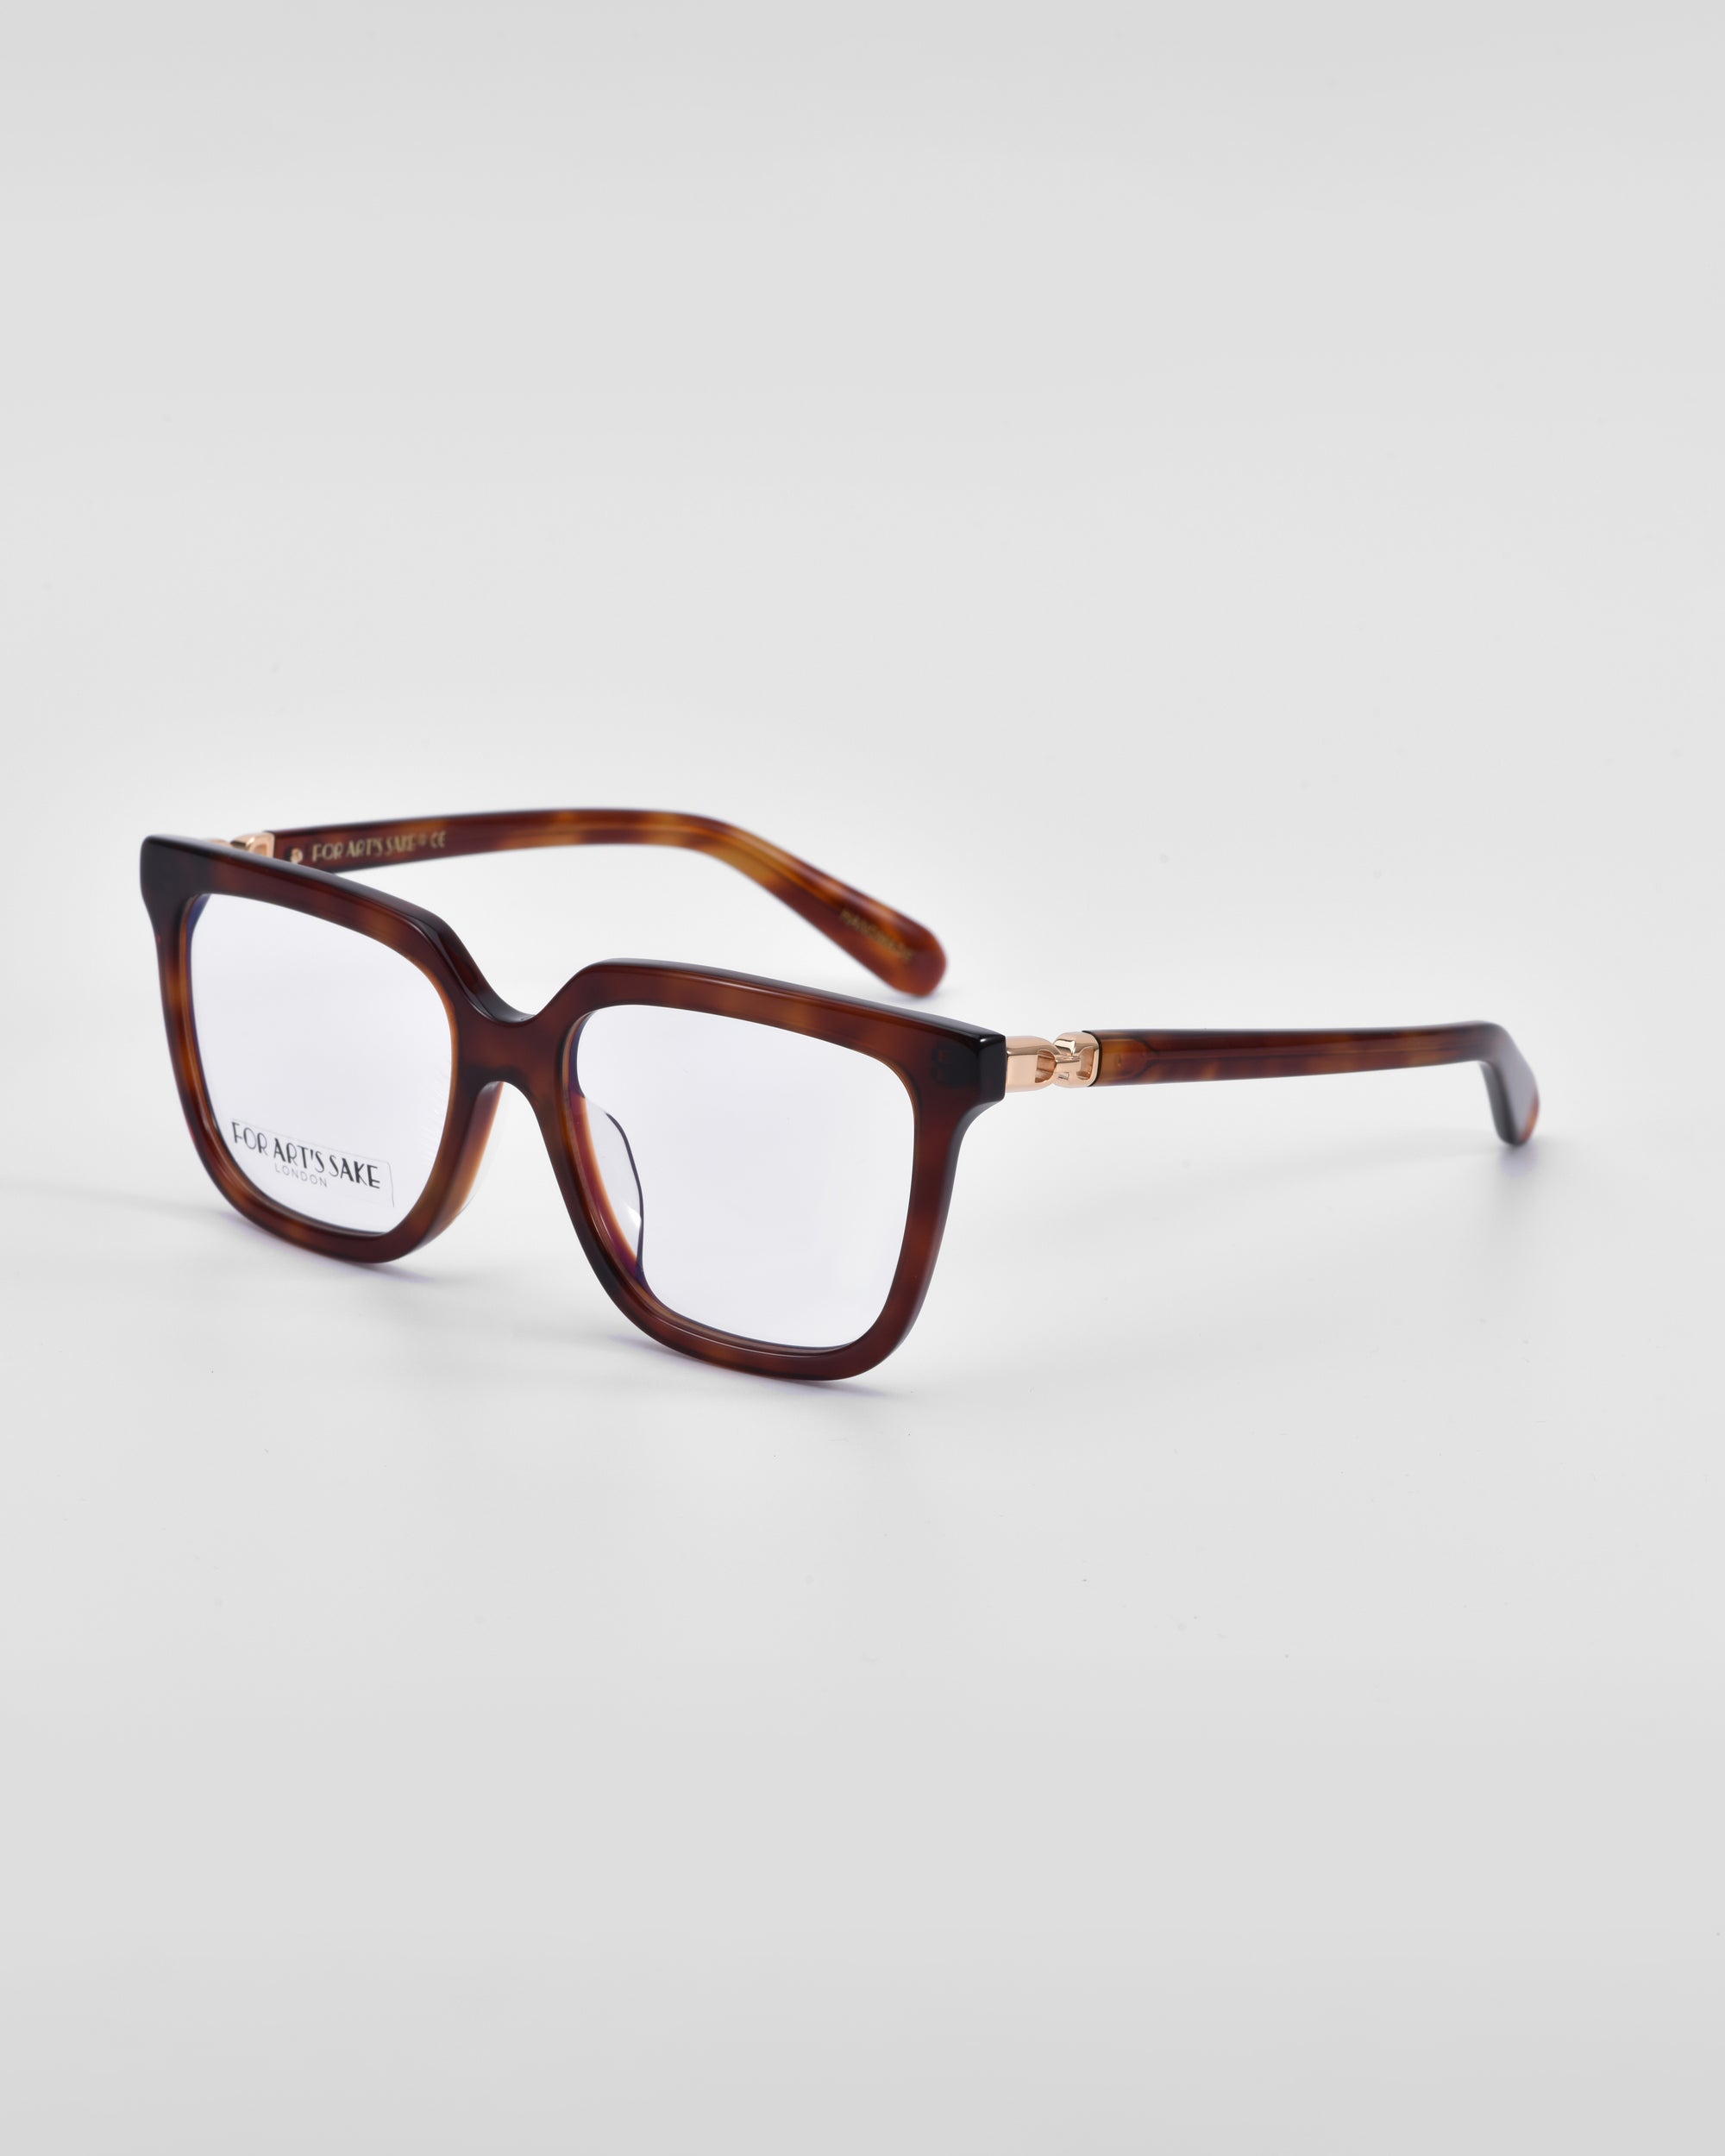 A pair of stylish eyeglasses with a dark tortoiseshell frame and clear lenses. The temples have a subtle 18-karat gold detail near the hinges. Featuring a classic square silhouette, the brand name &quot;For Art&#39;s Sake®&quot; is visible on the inside of the left temple.